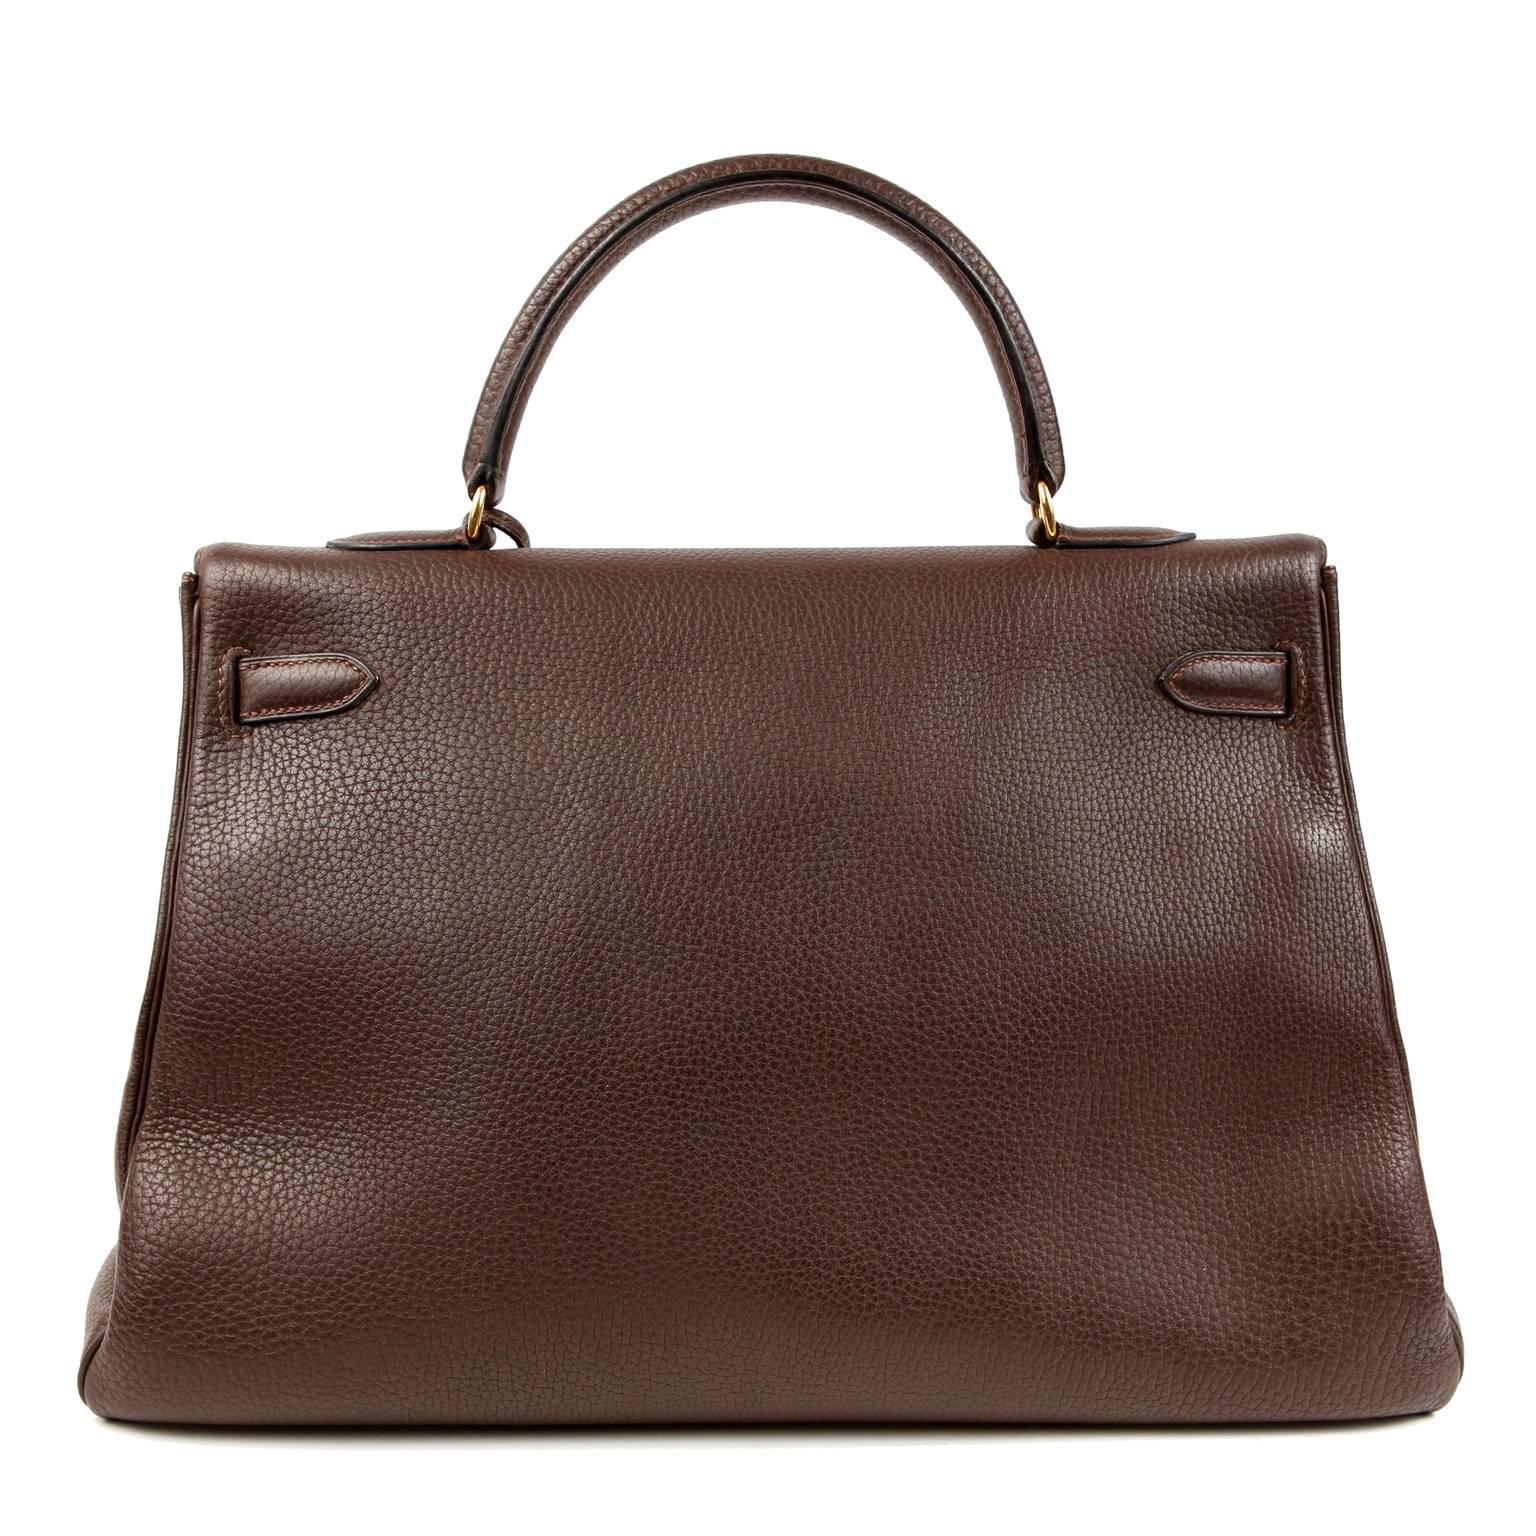 Hermès Cacao Togo 35 cm Kelly Retourne- Excellent Condition
    Hermès bags are considered the ultimate luxury item worldwide.  Each piece is handcrafted with waitlists that can exceed a year or more.  The demure Kelly Retourne, or Souple, is a bit